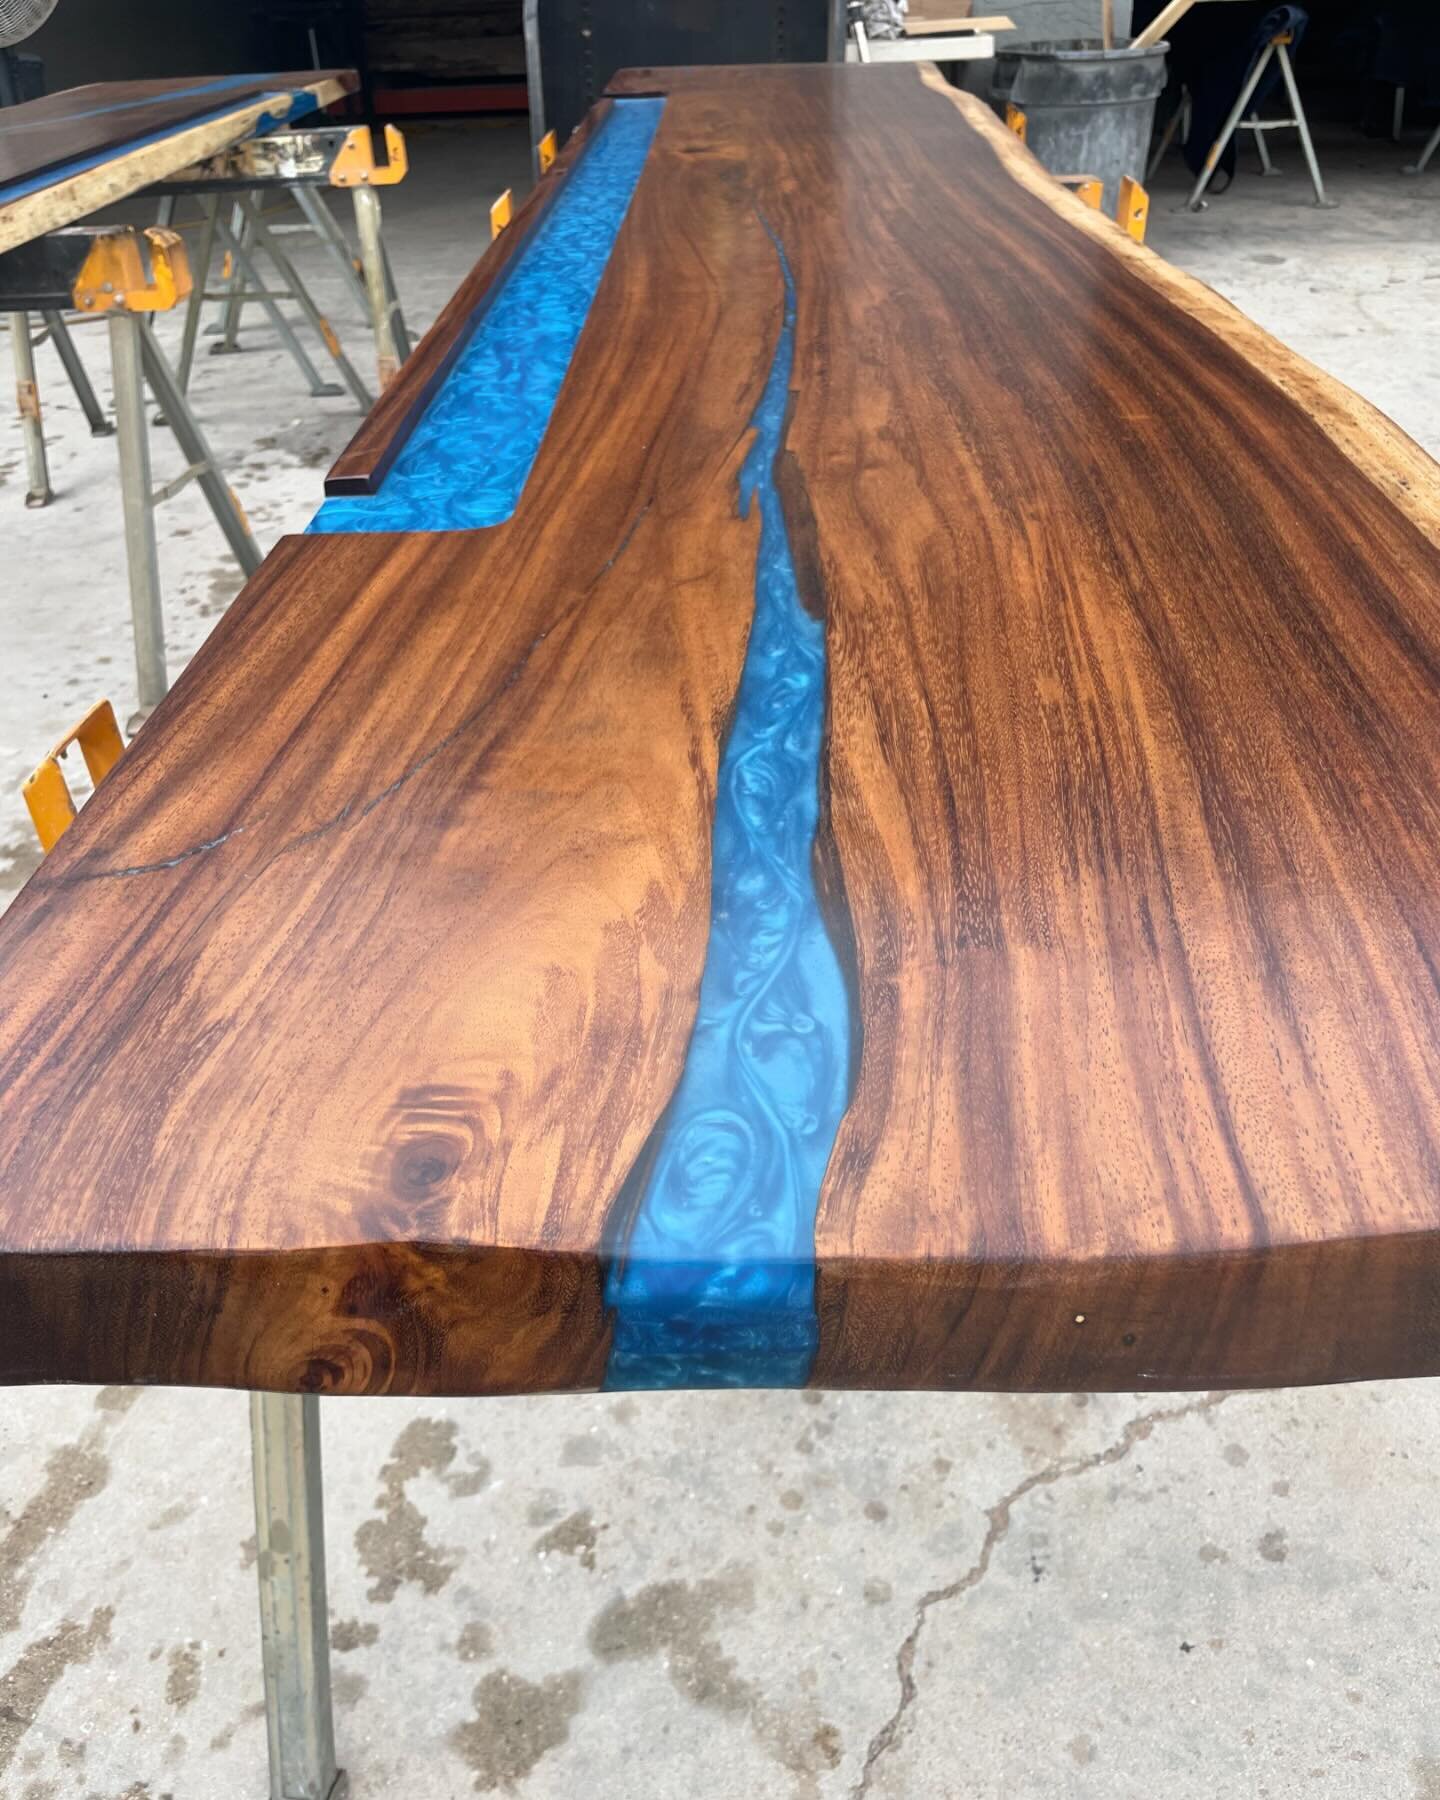 Did you know??? We custom build tables, bar tops and more for dozens of local restaurants and hotels! What project can we help you with? 

#monkeypod #bartops #tables #dining #resturants #southflorida #custom #handmade #liveedge #epoxy #resin #wholes